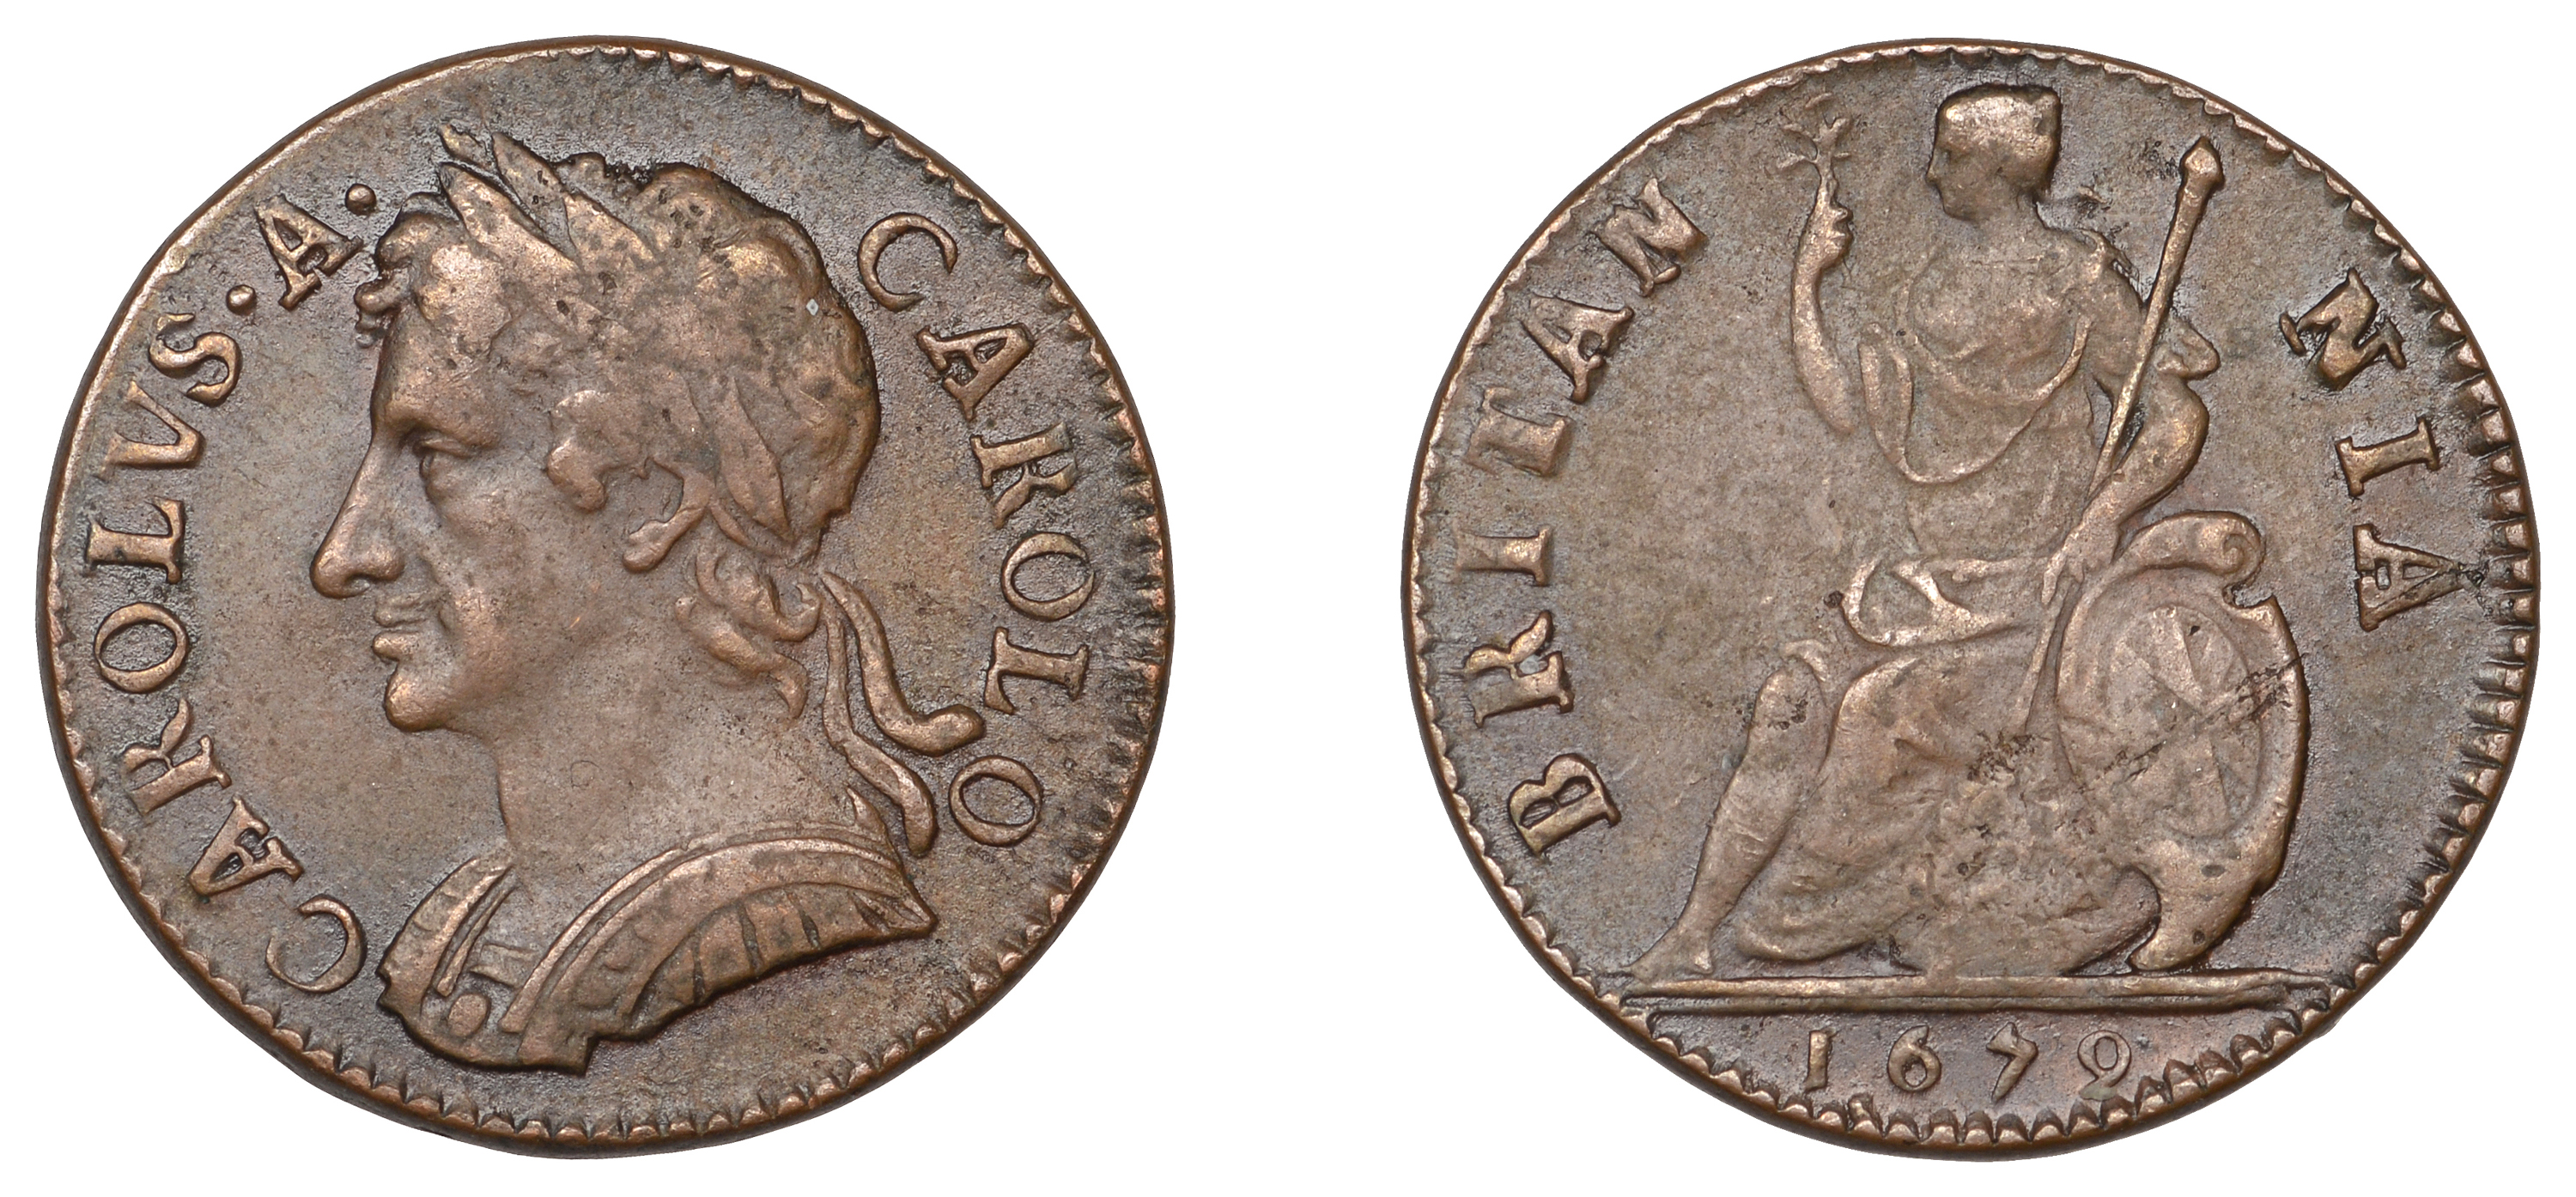 Charles II (1660-1685), Farthing, 1679, no stop on rev. (Cooke 701; BMC 531; S 3394). Nearly...